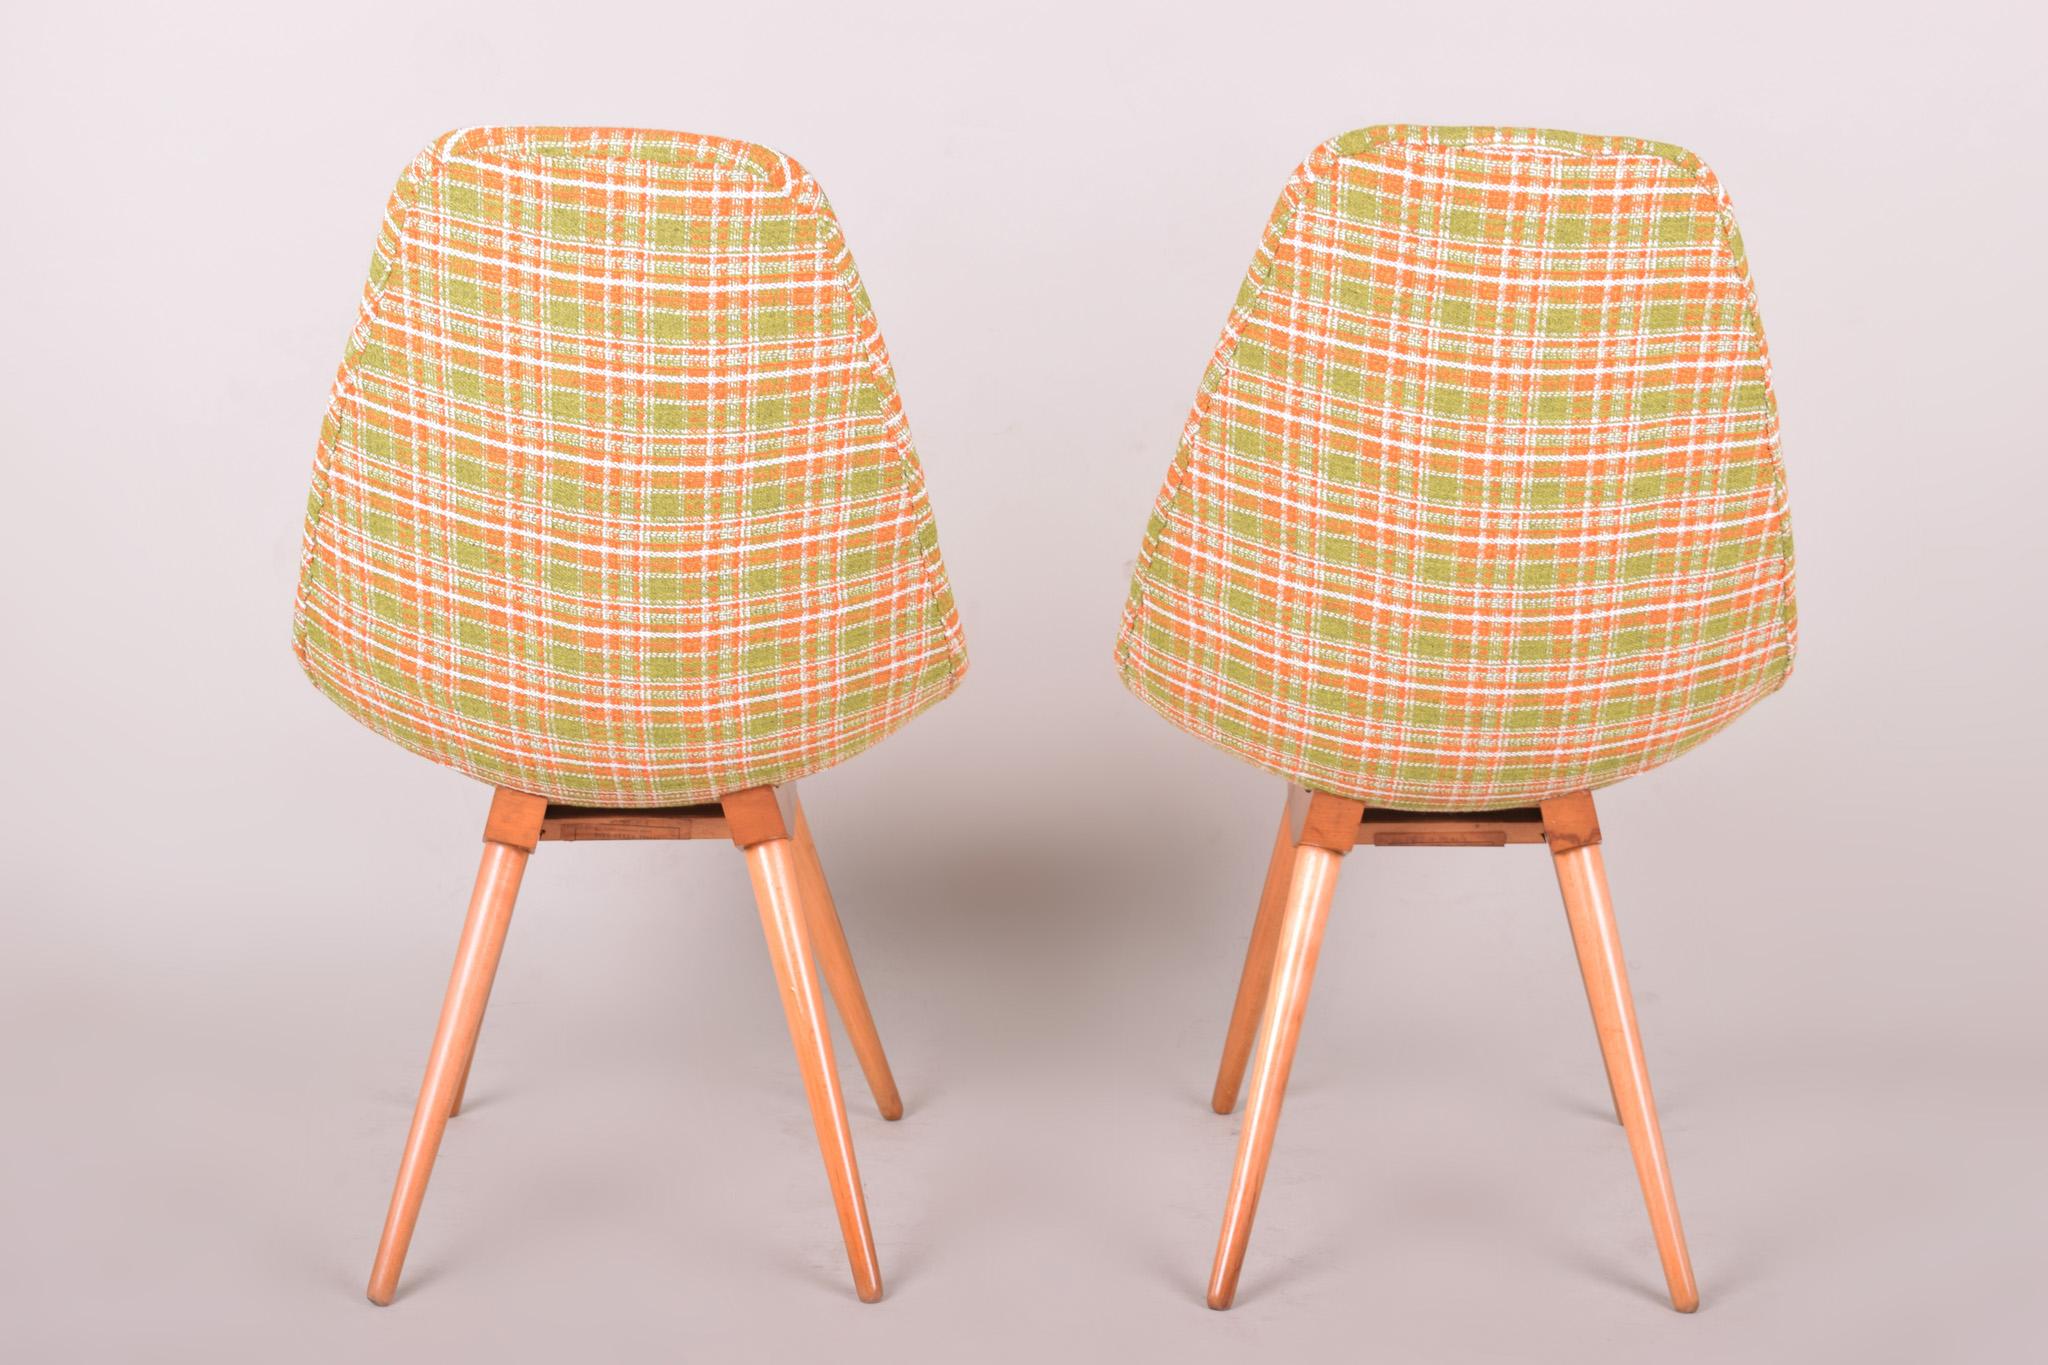 Restored Pair of Czech Midcentury Chairs, 1950-1960, Made Out of Beech & Fabric In Good Condition For Sale In Horomerice, CZ